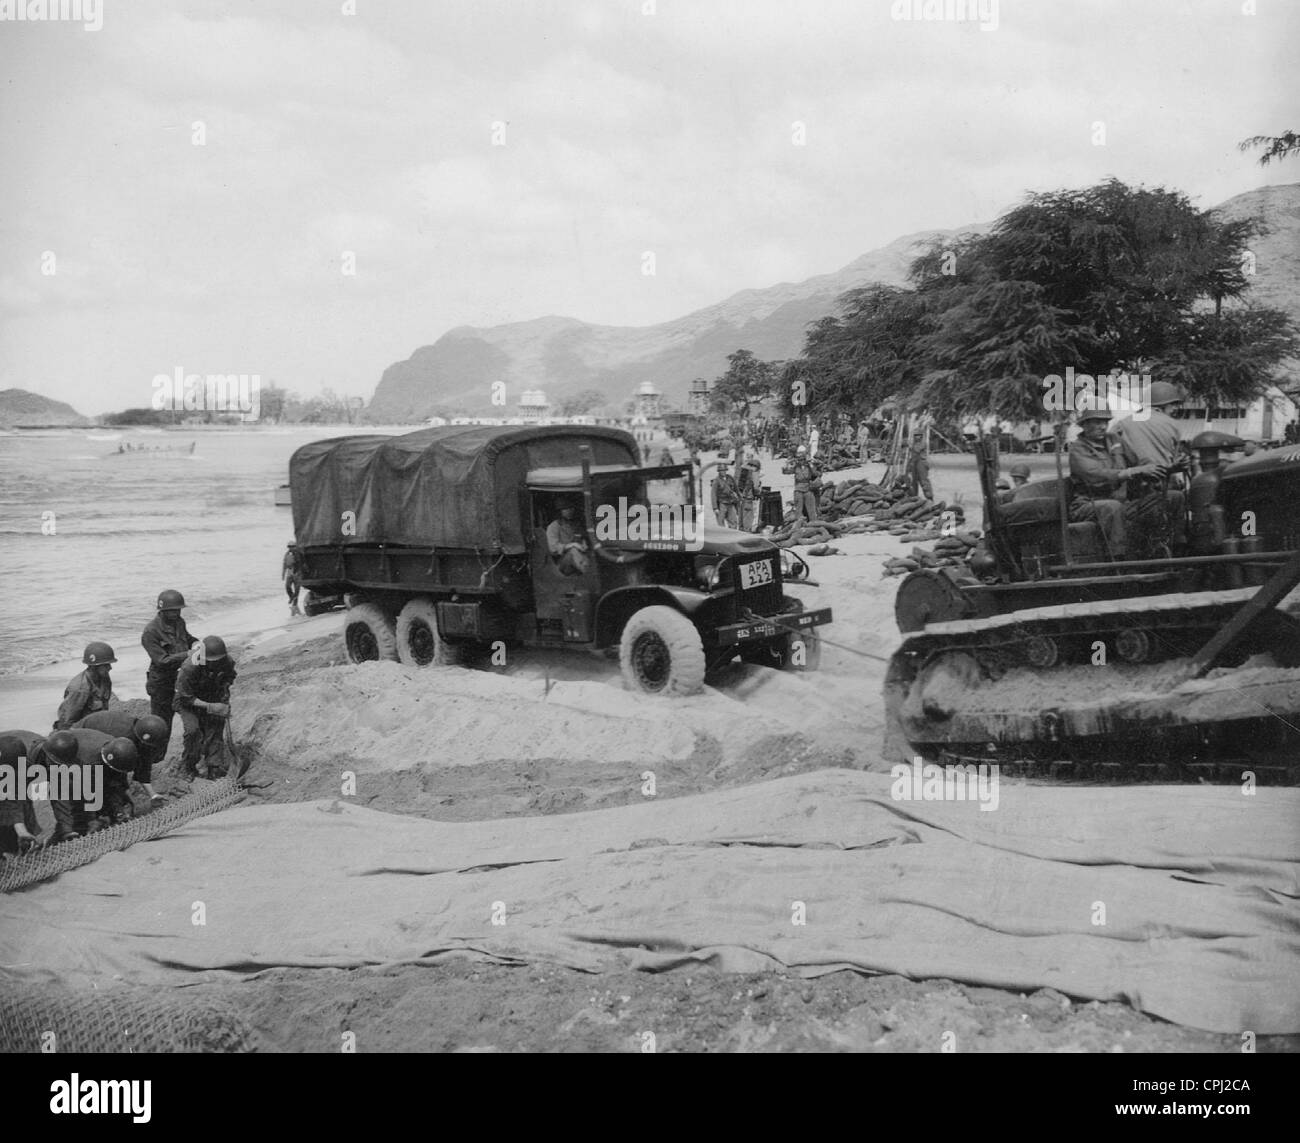 American Troupes Landing on an Island in the Pacific, 1941 (b/w photo) Stock Photo